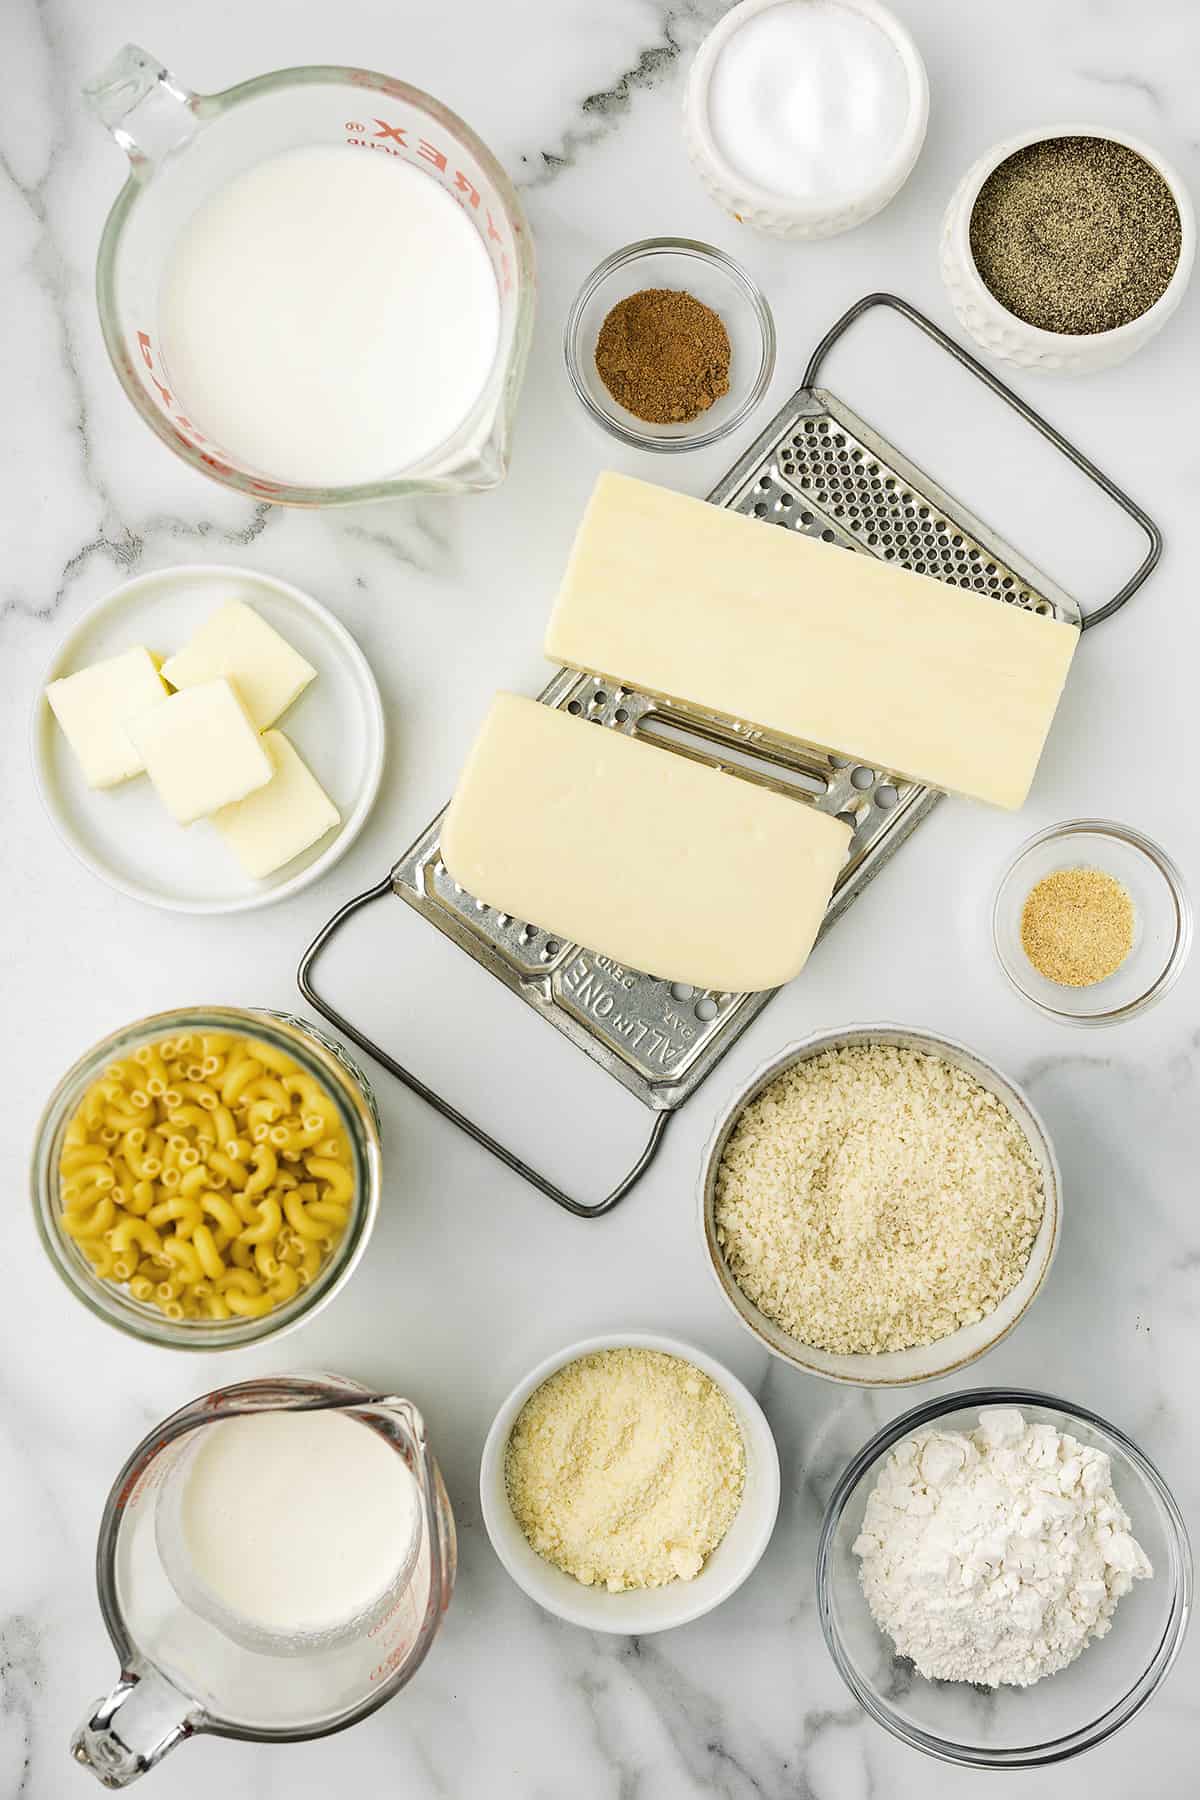 Ingredients for baked mac and cheese recipe.